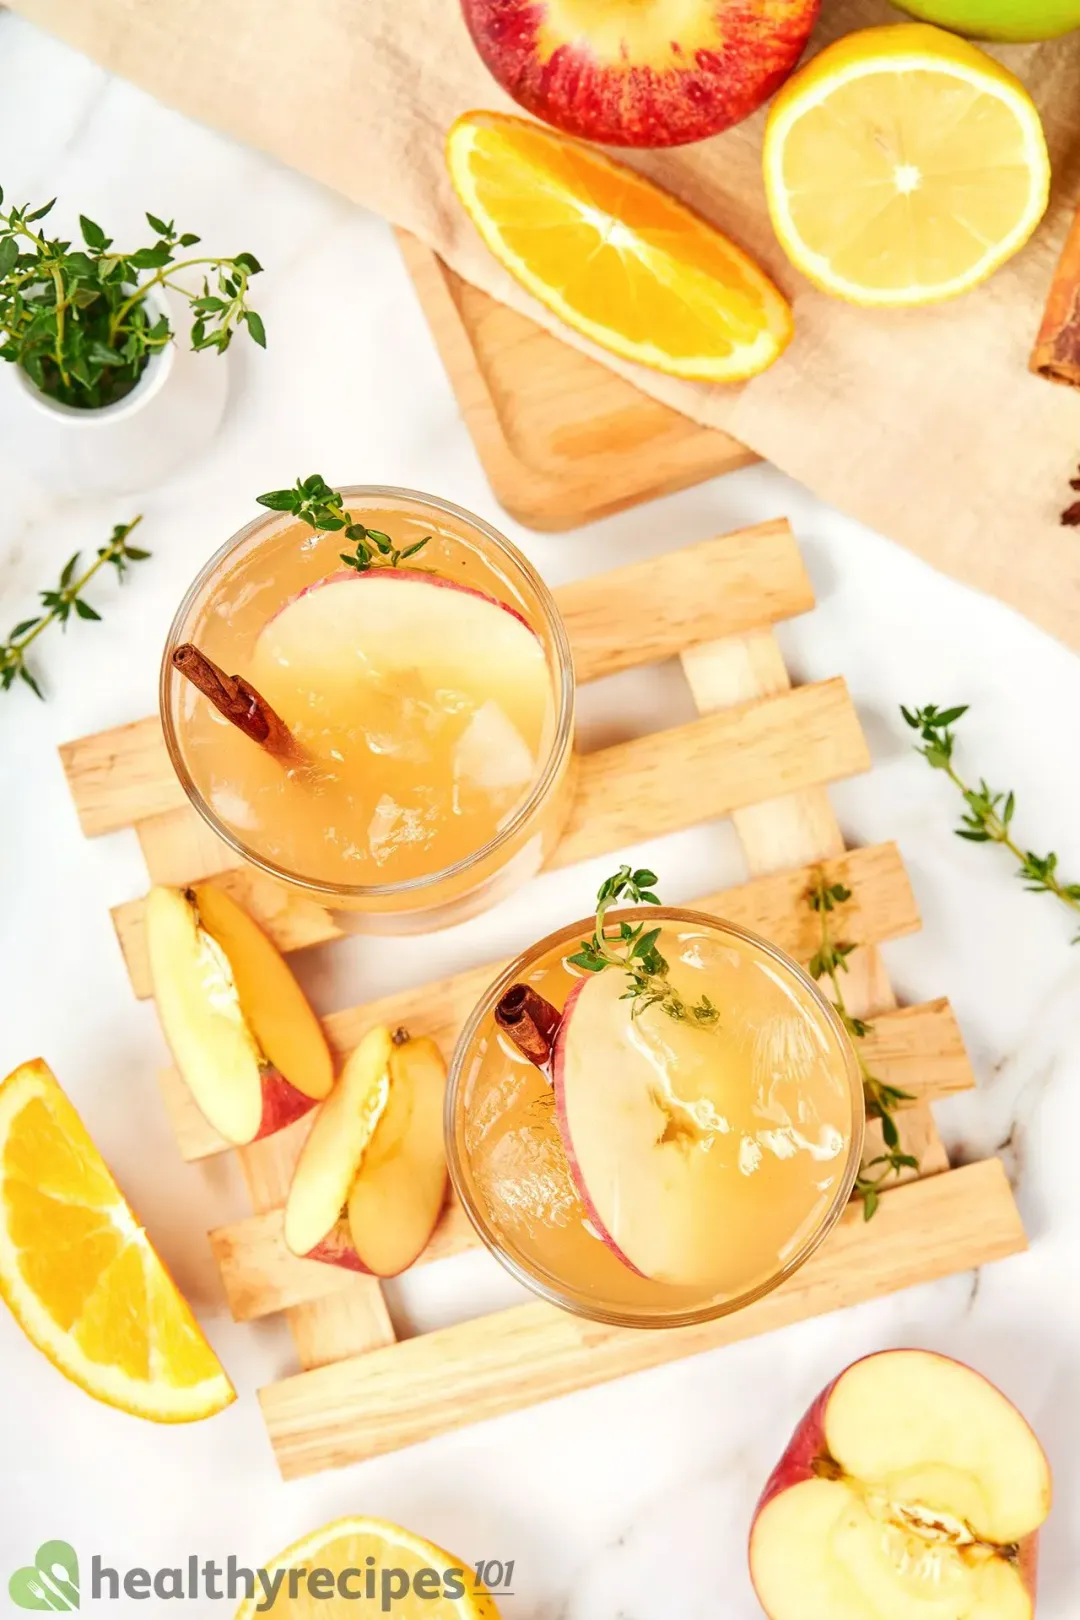 A picture taken from the top of two apple cider cocktail garnished with rosemary sprigs, apple wedges, oranges, and cinnamon sticks